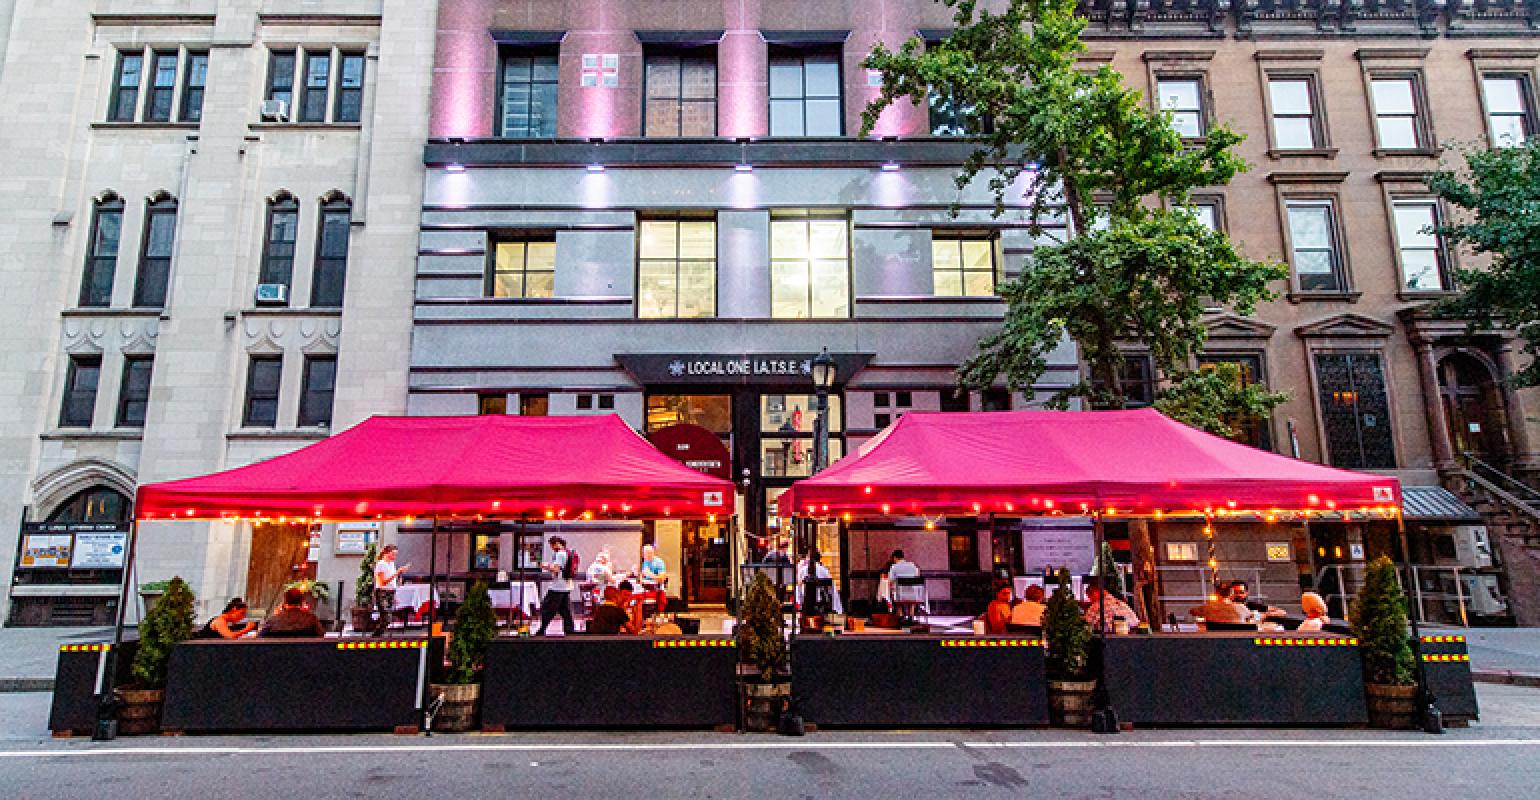 New York City To Make Outdoor Restaurant Dining Permanent Nations Restaurant News 4904